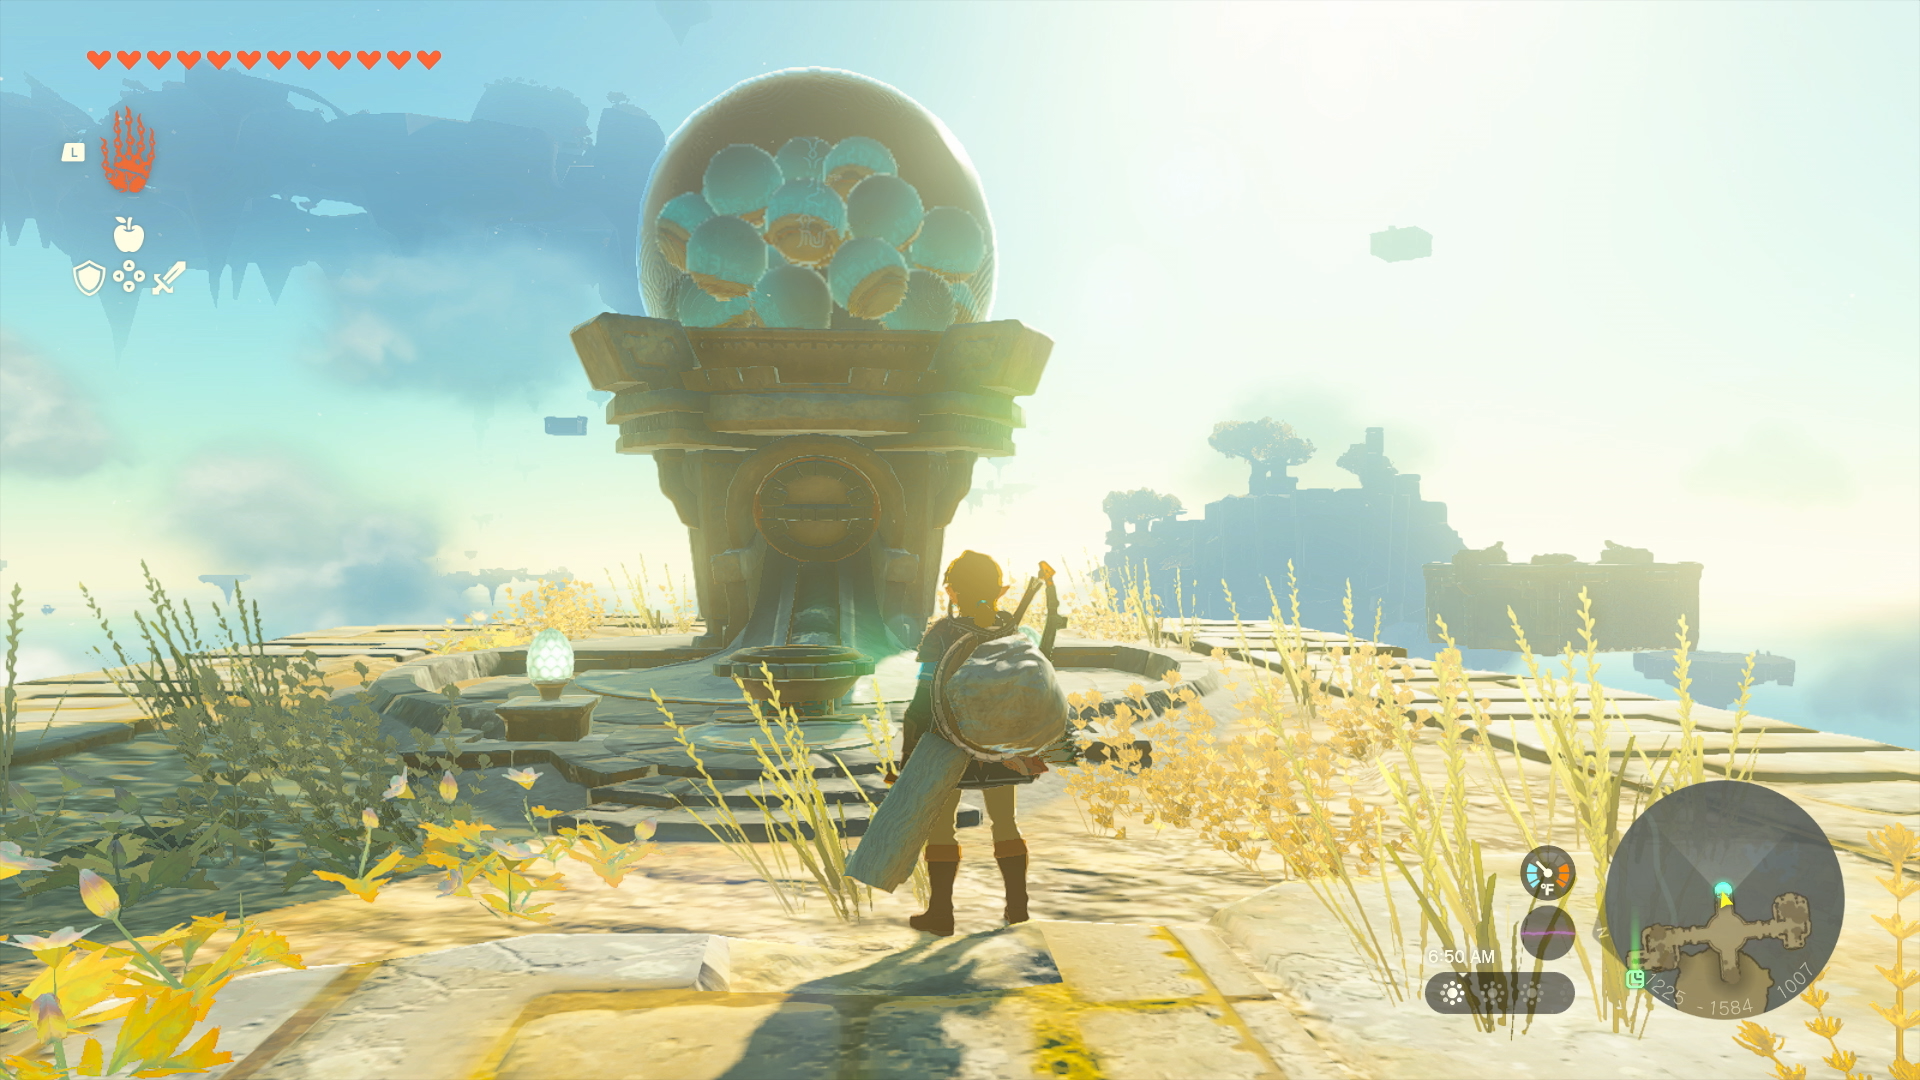 A Minecraft player is building the entire Zelda: Breath of the